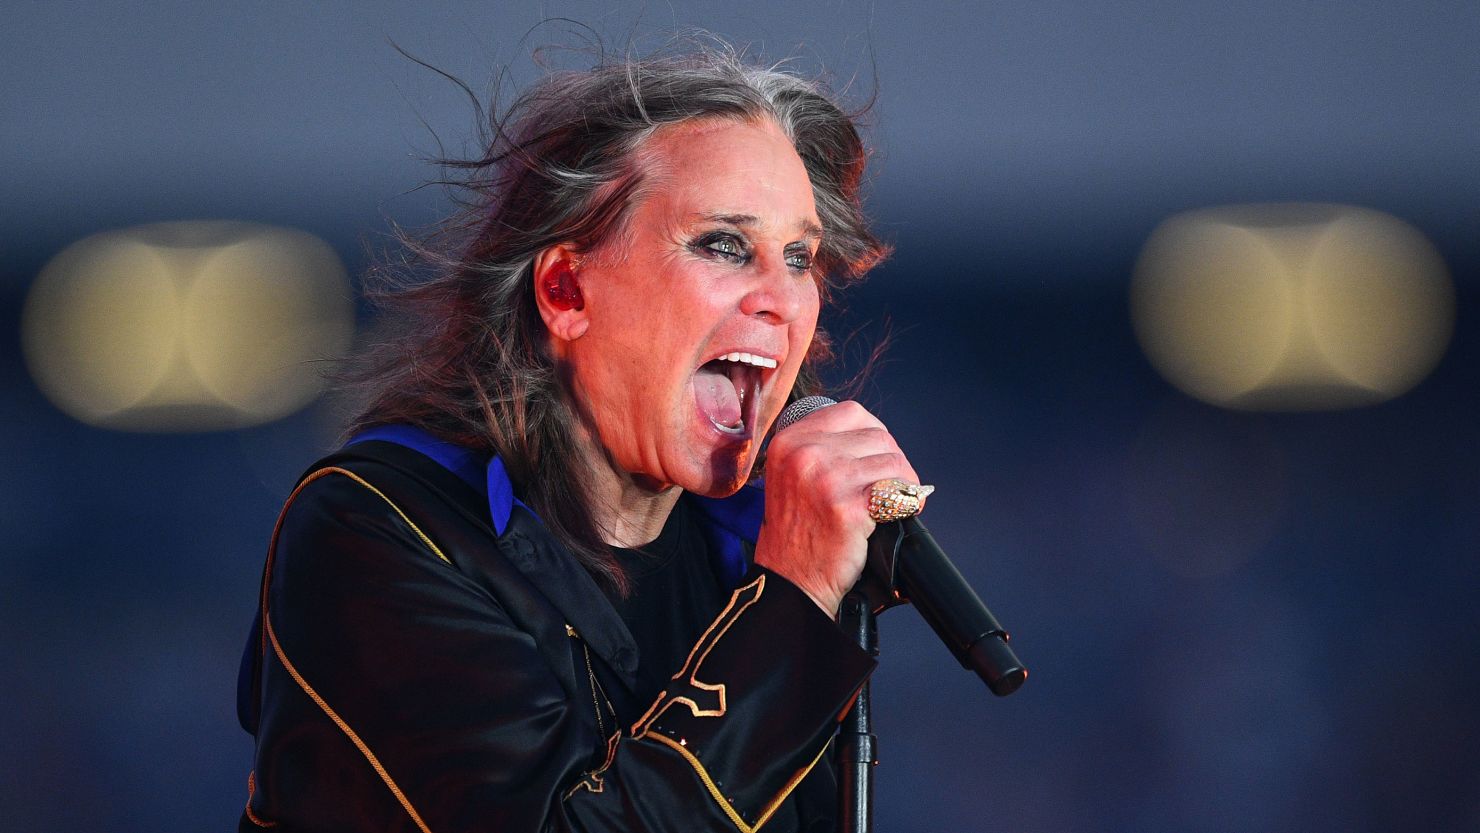 INGLEWOOD, CA - SEPTEMBER 08: Singer Ozzy Osbourne performs at halftime during the NFL game between the Buffalo Bills and the Los Angeles Rams on September 8, 2022, at SoFi Stadium in Inglewood, CA. (Photo by Brian Rothmuller/Icon Sportswire via Getty Images)